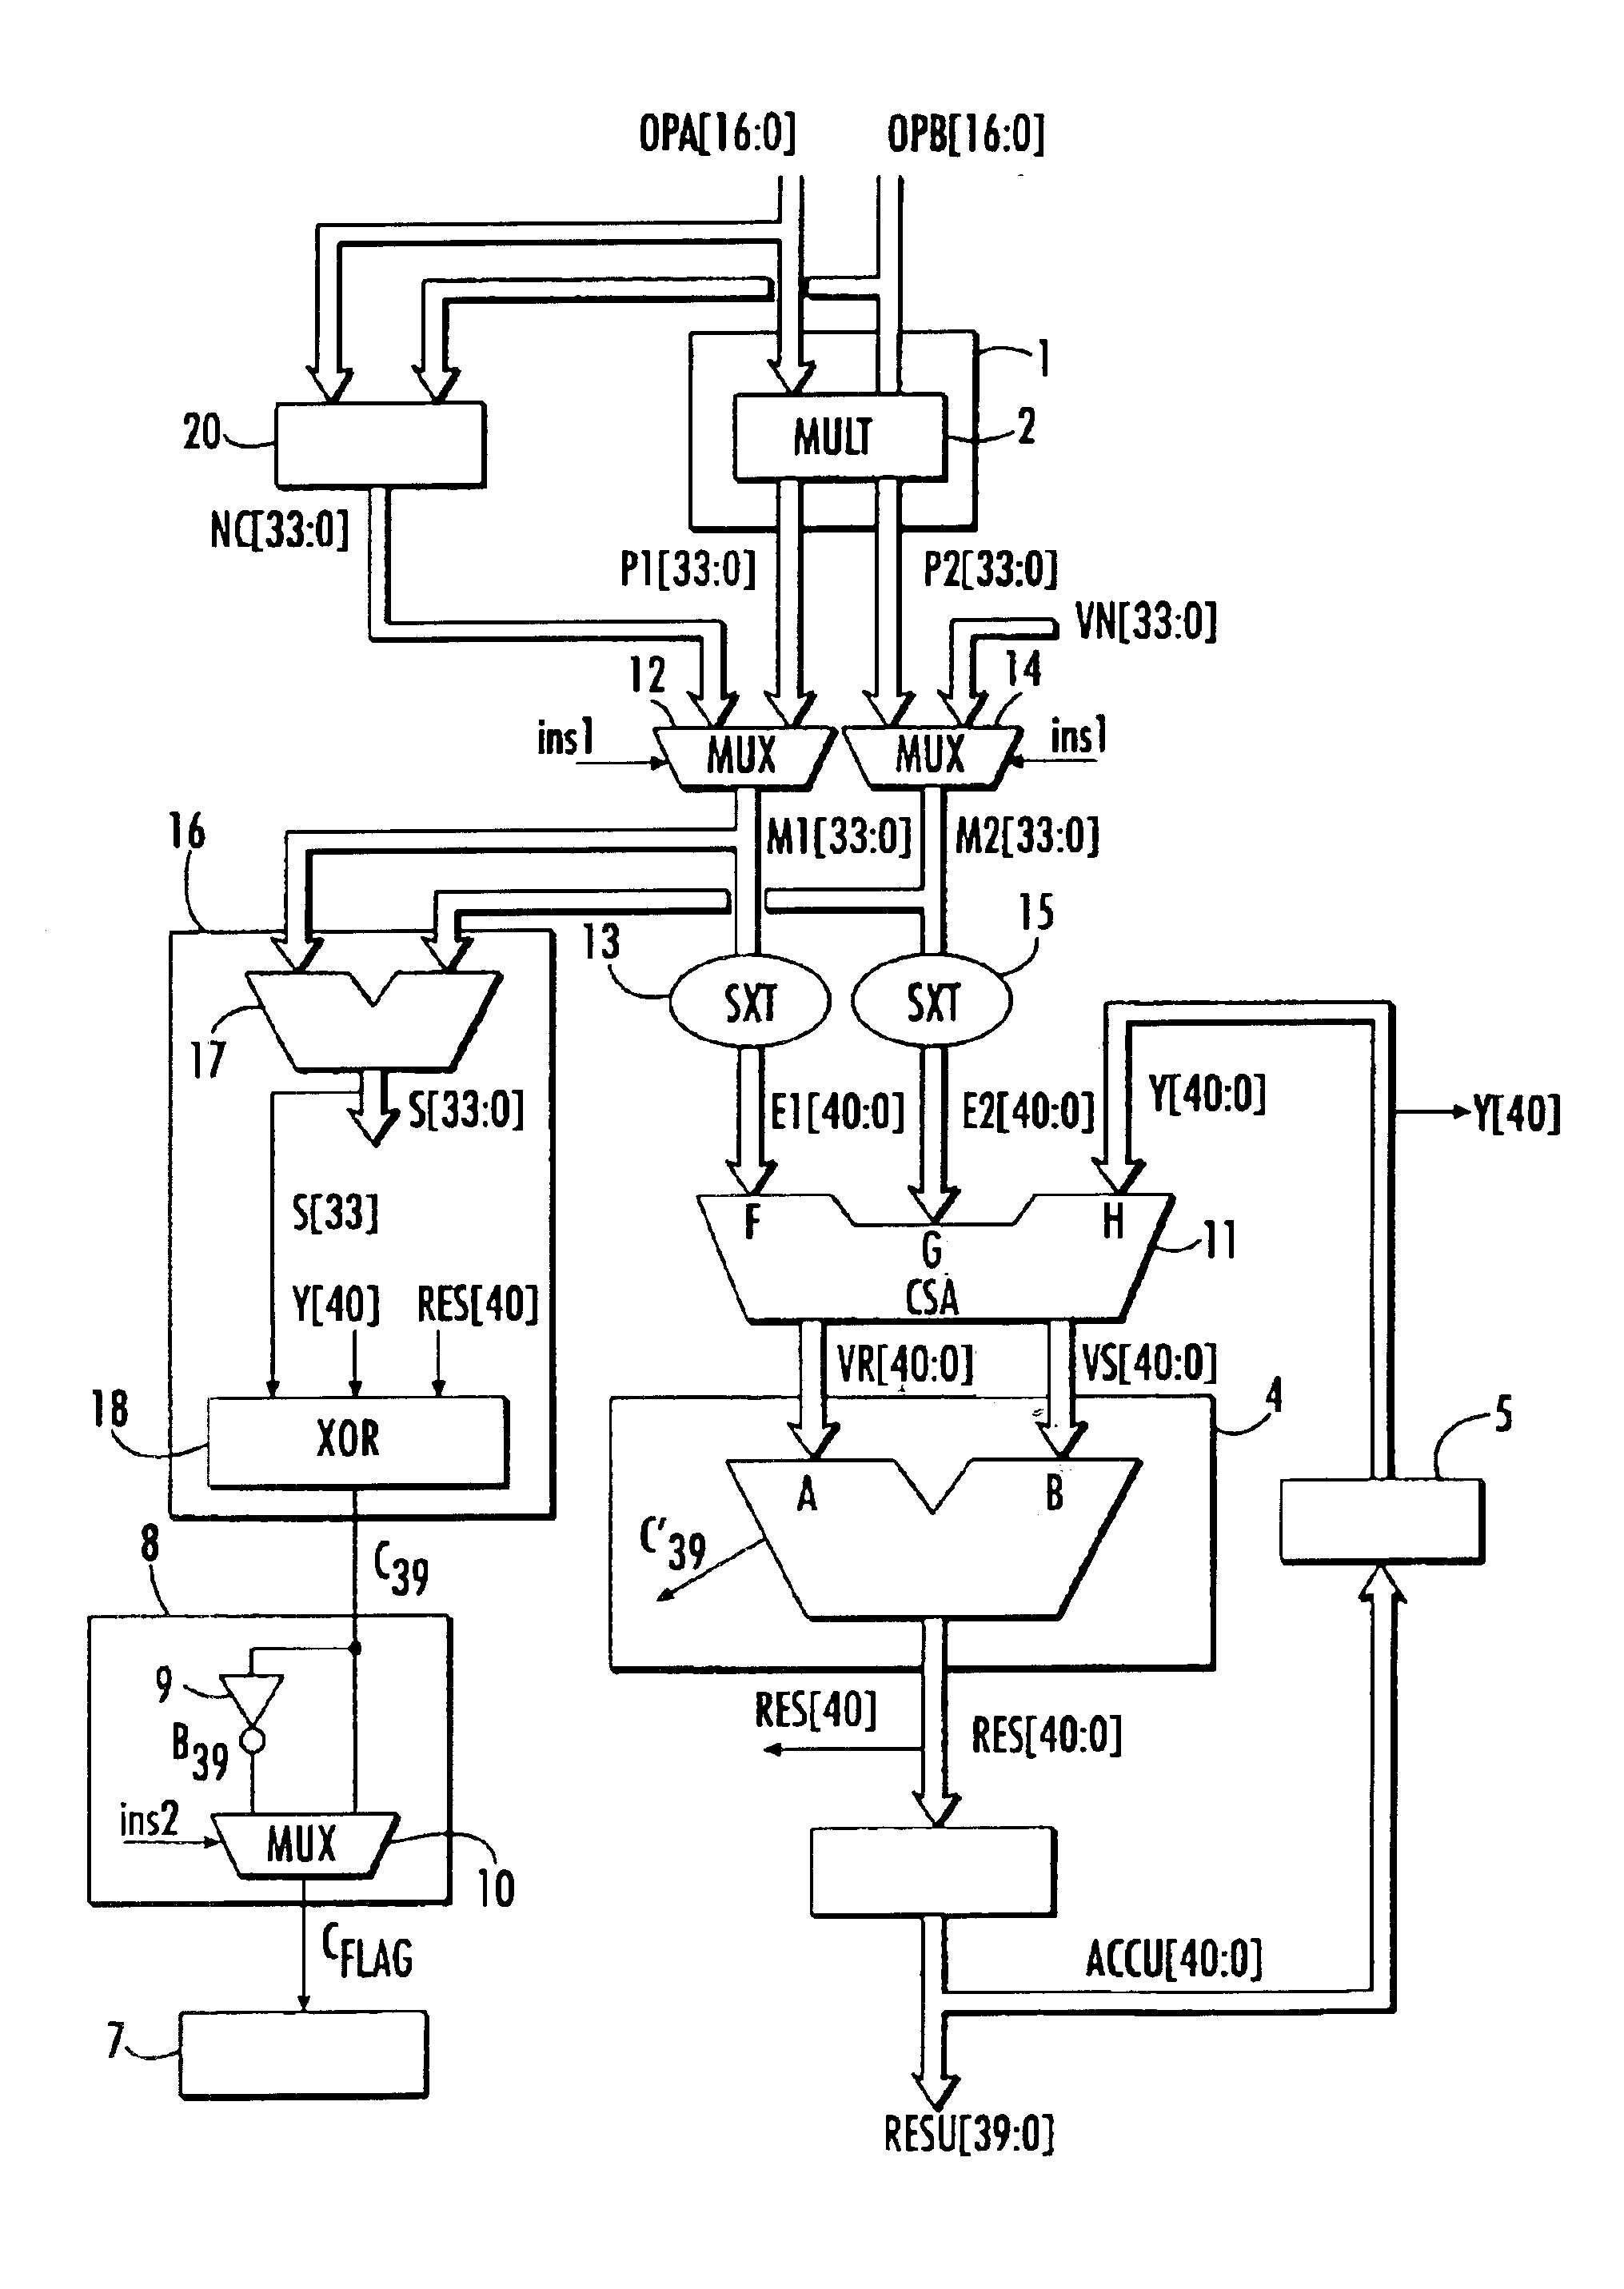 Microarchitecture of an arithmetic unit